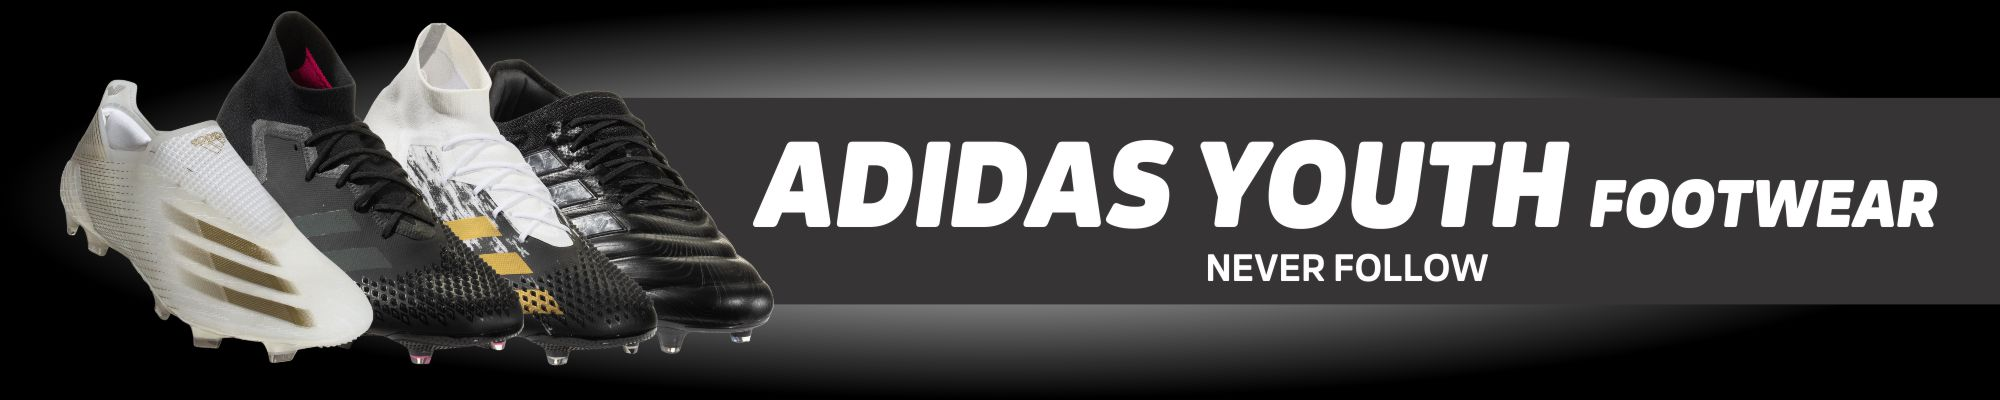 Adidas Youth Footwear - By Price: Highest to Lowest